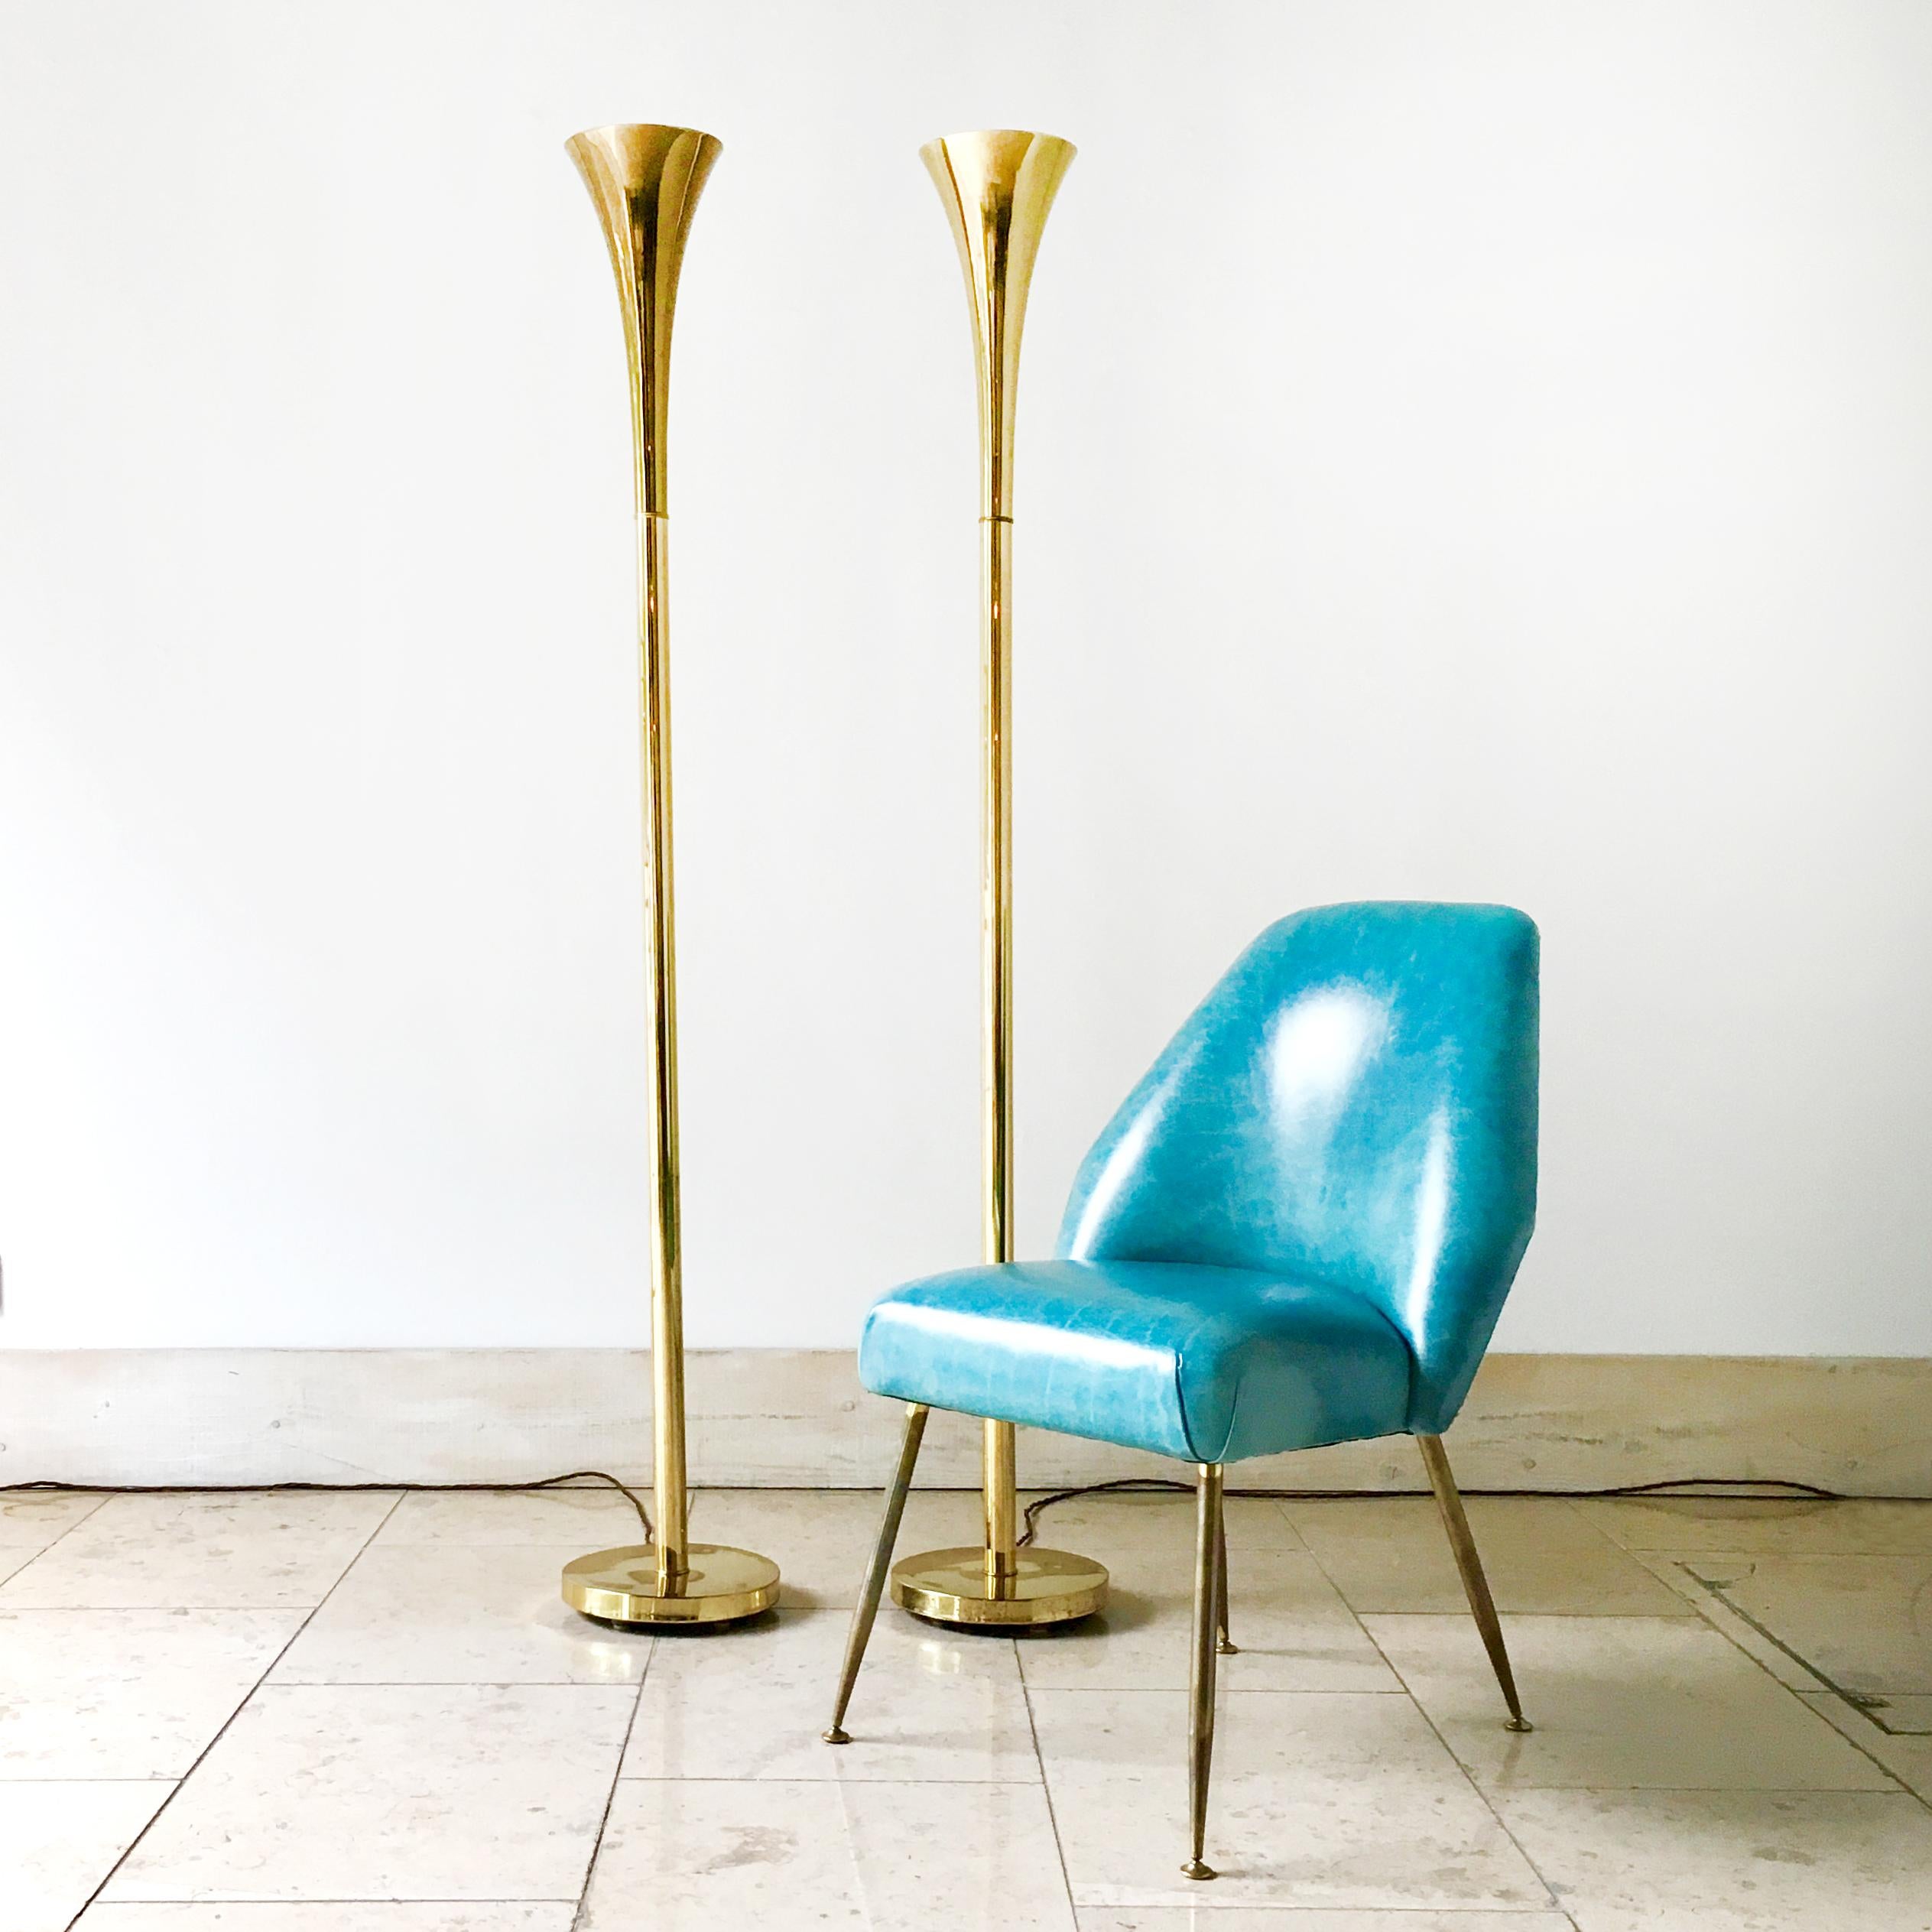 Pair of brass trumpet uplighter floor lamps by The Laurel Light Company USA, 1960s.
 